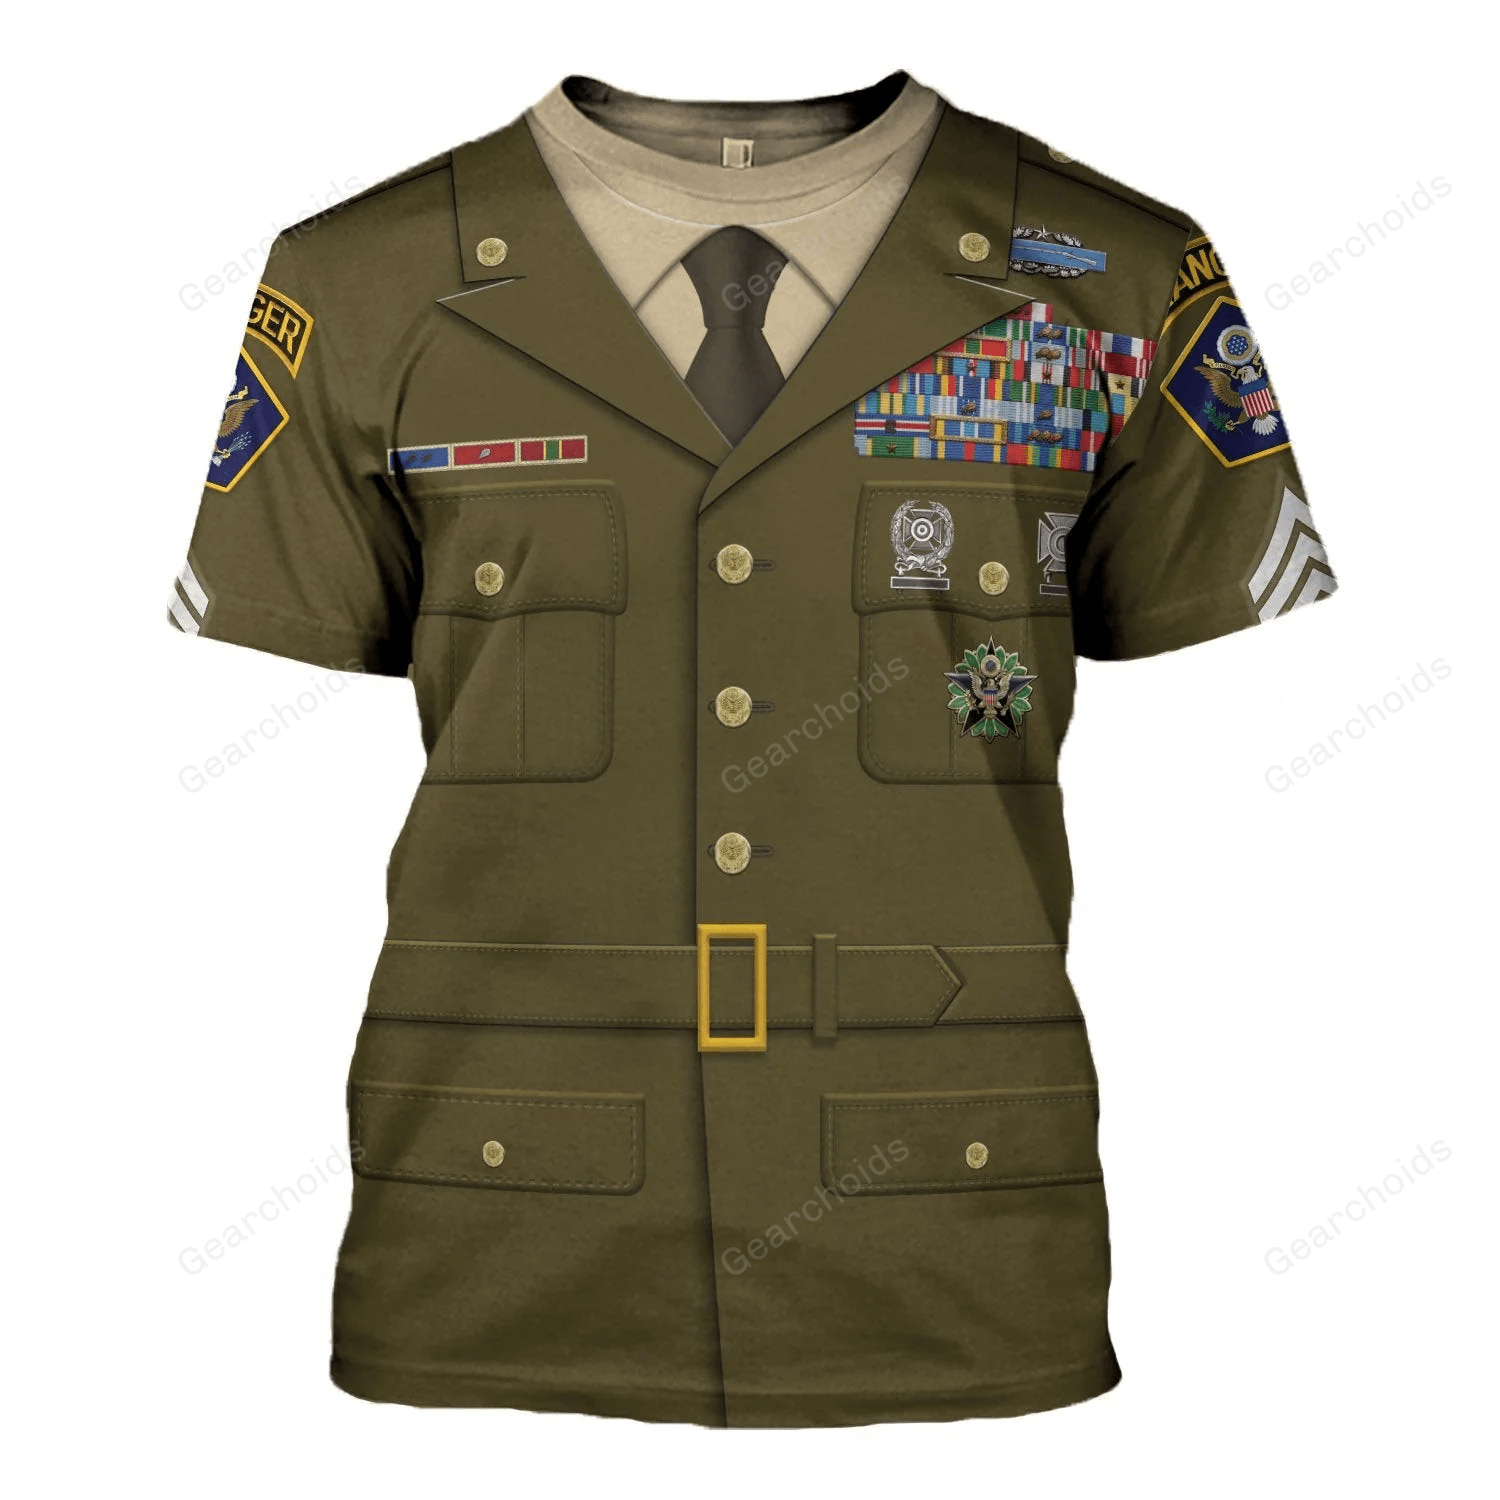 Rank And Branches Enlisted Army Service T-Shirt